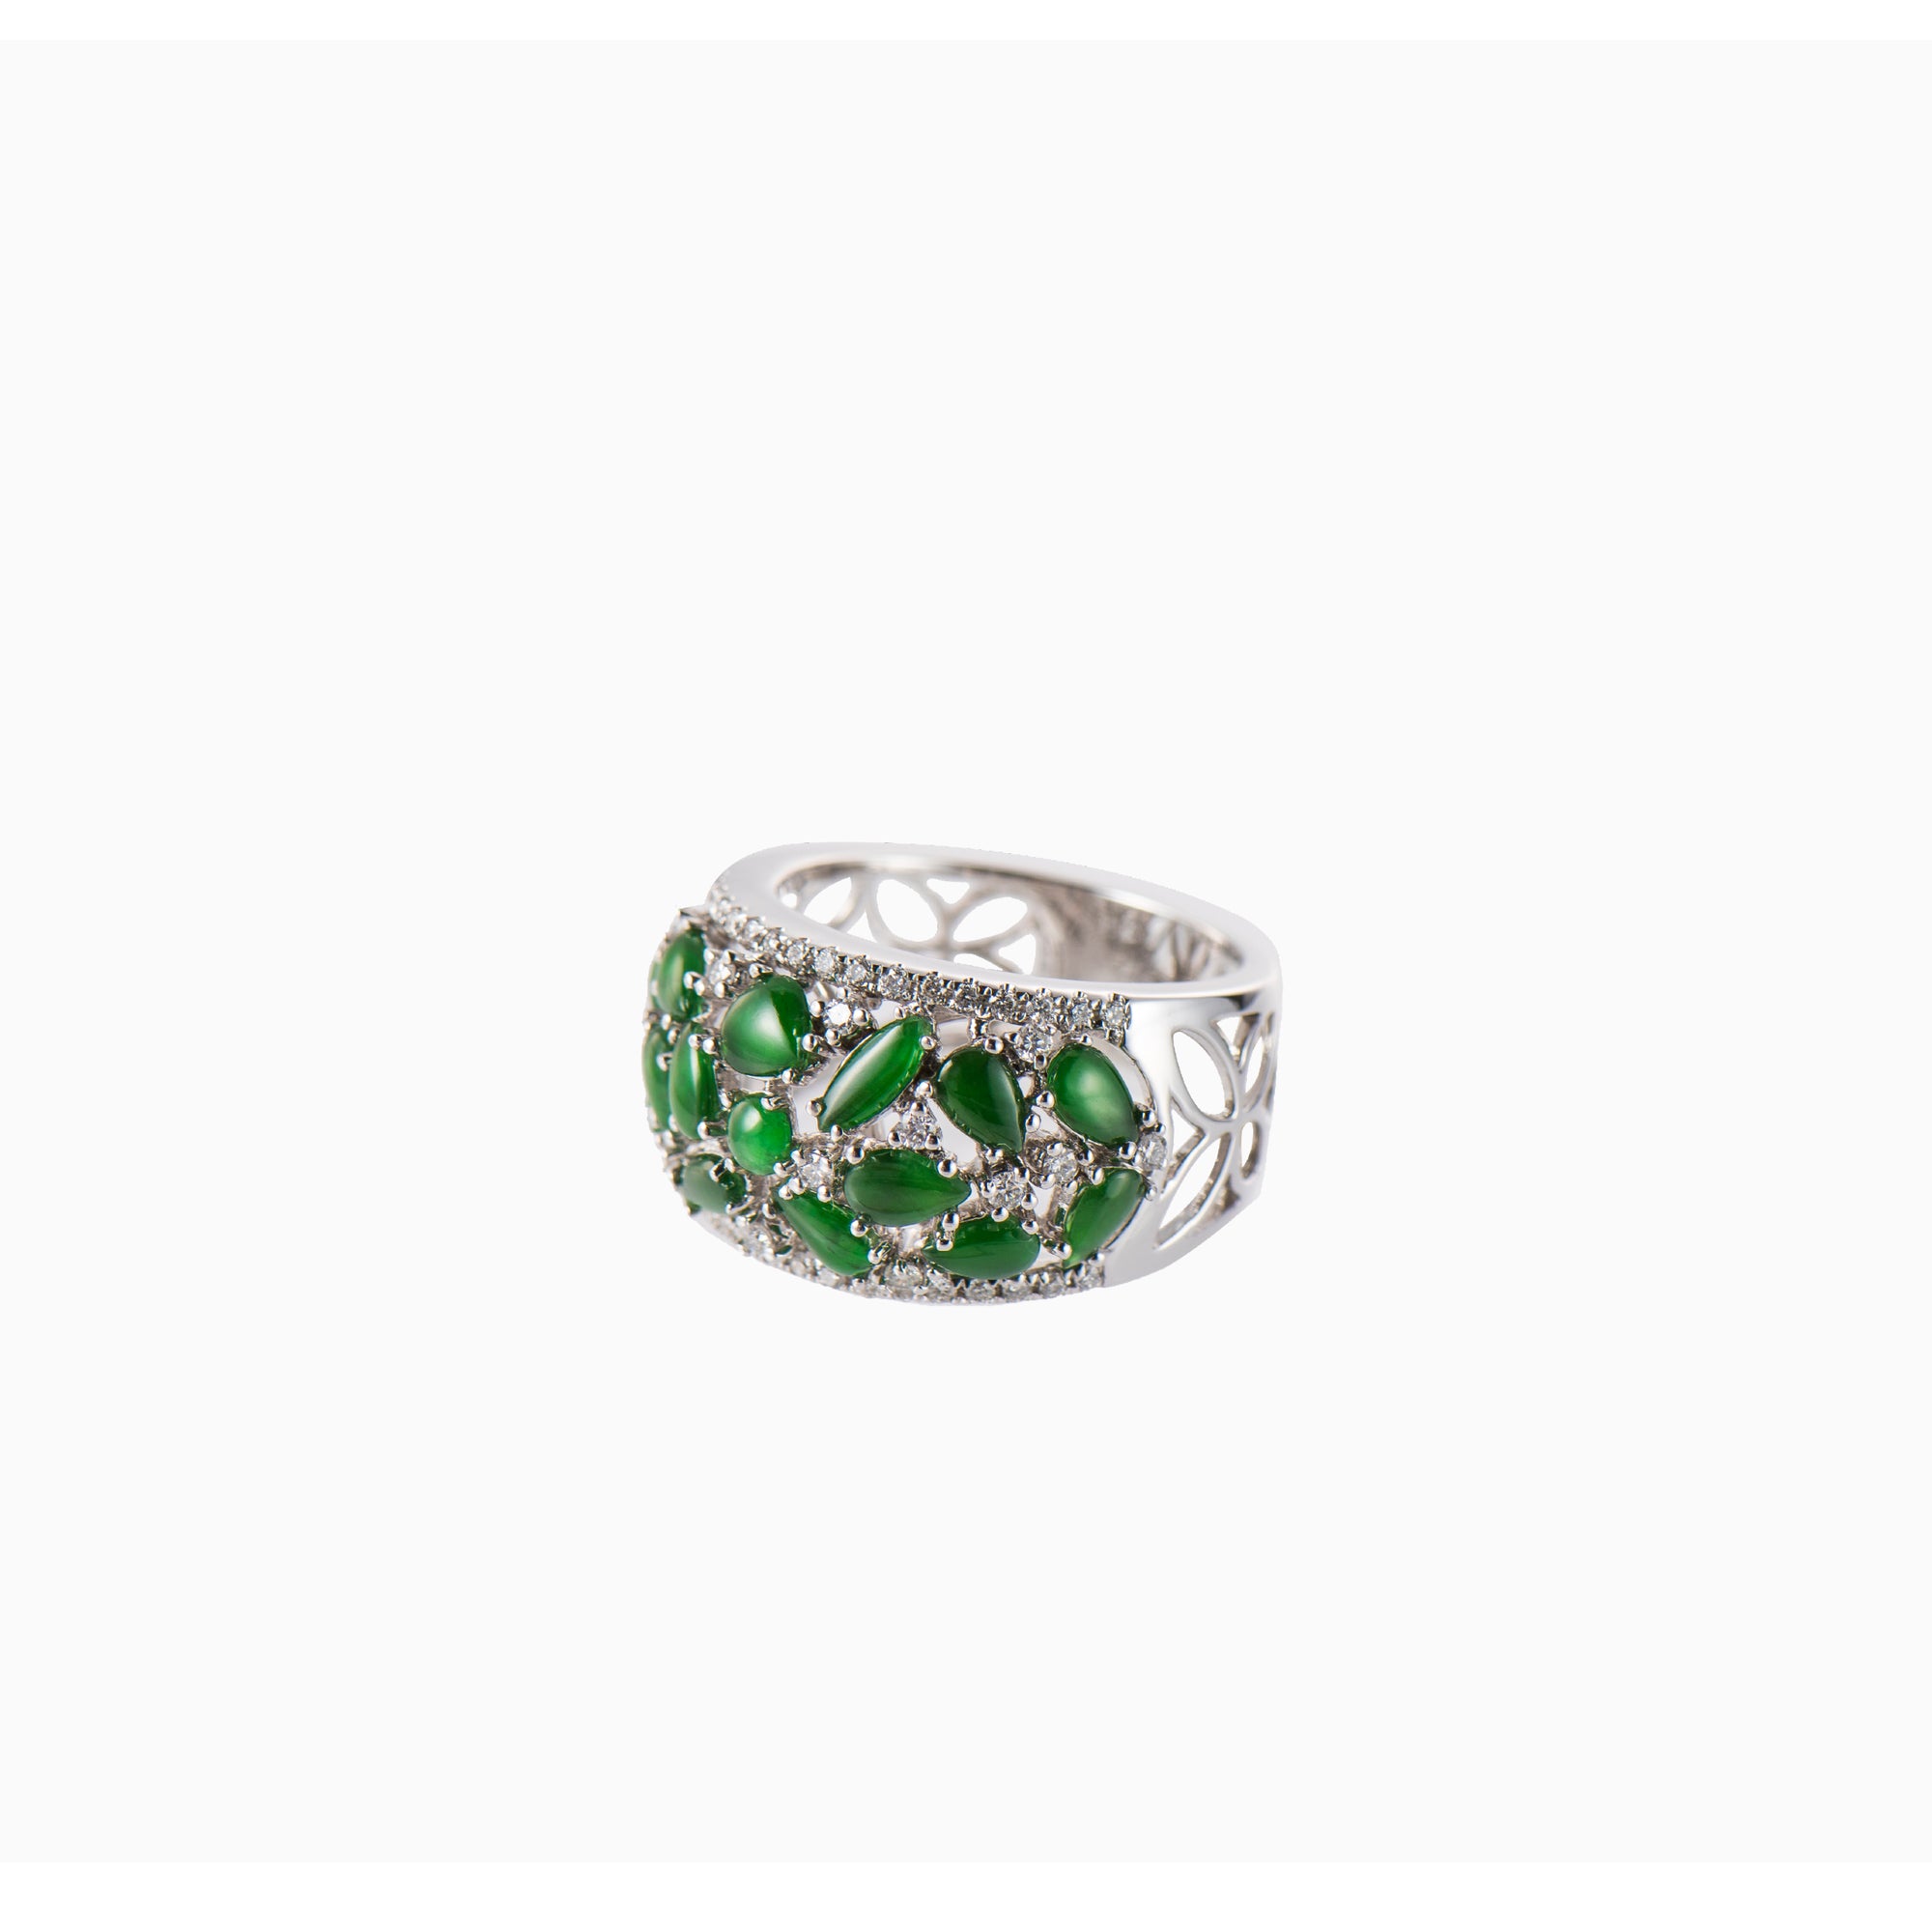 A stylish green jade ring called "Starry Night" with many diamonds